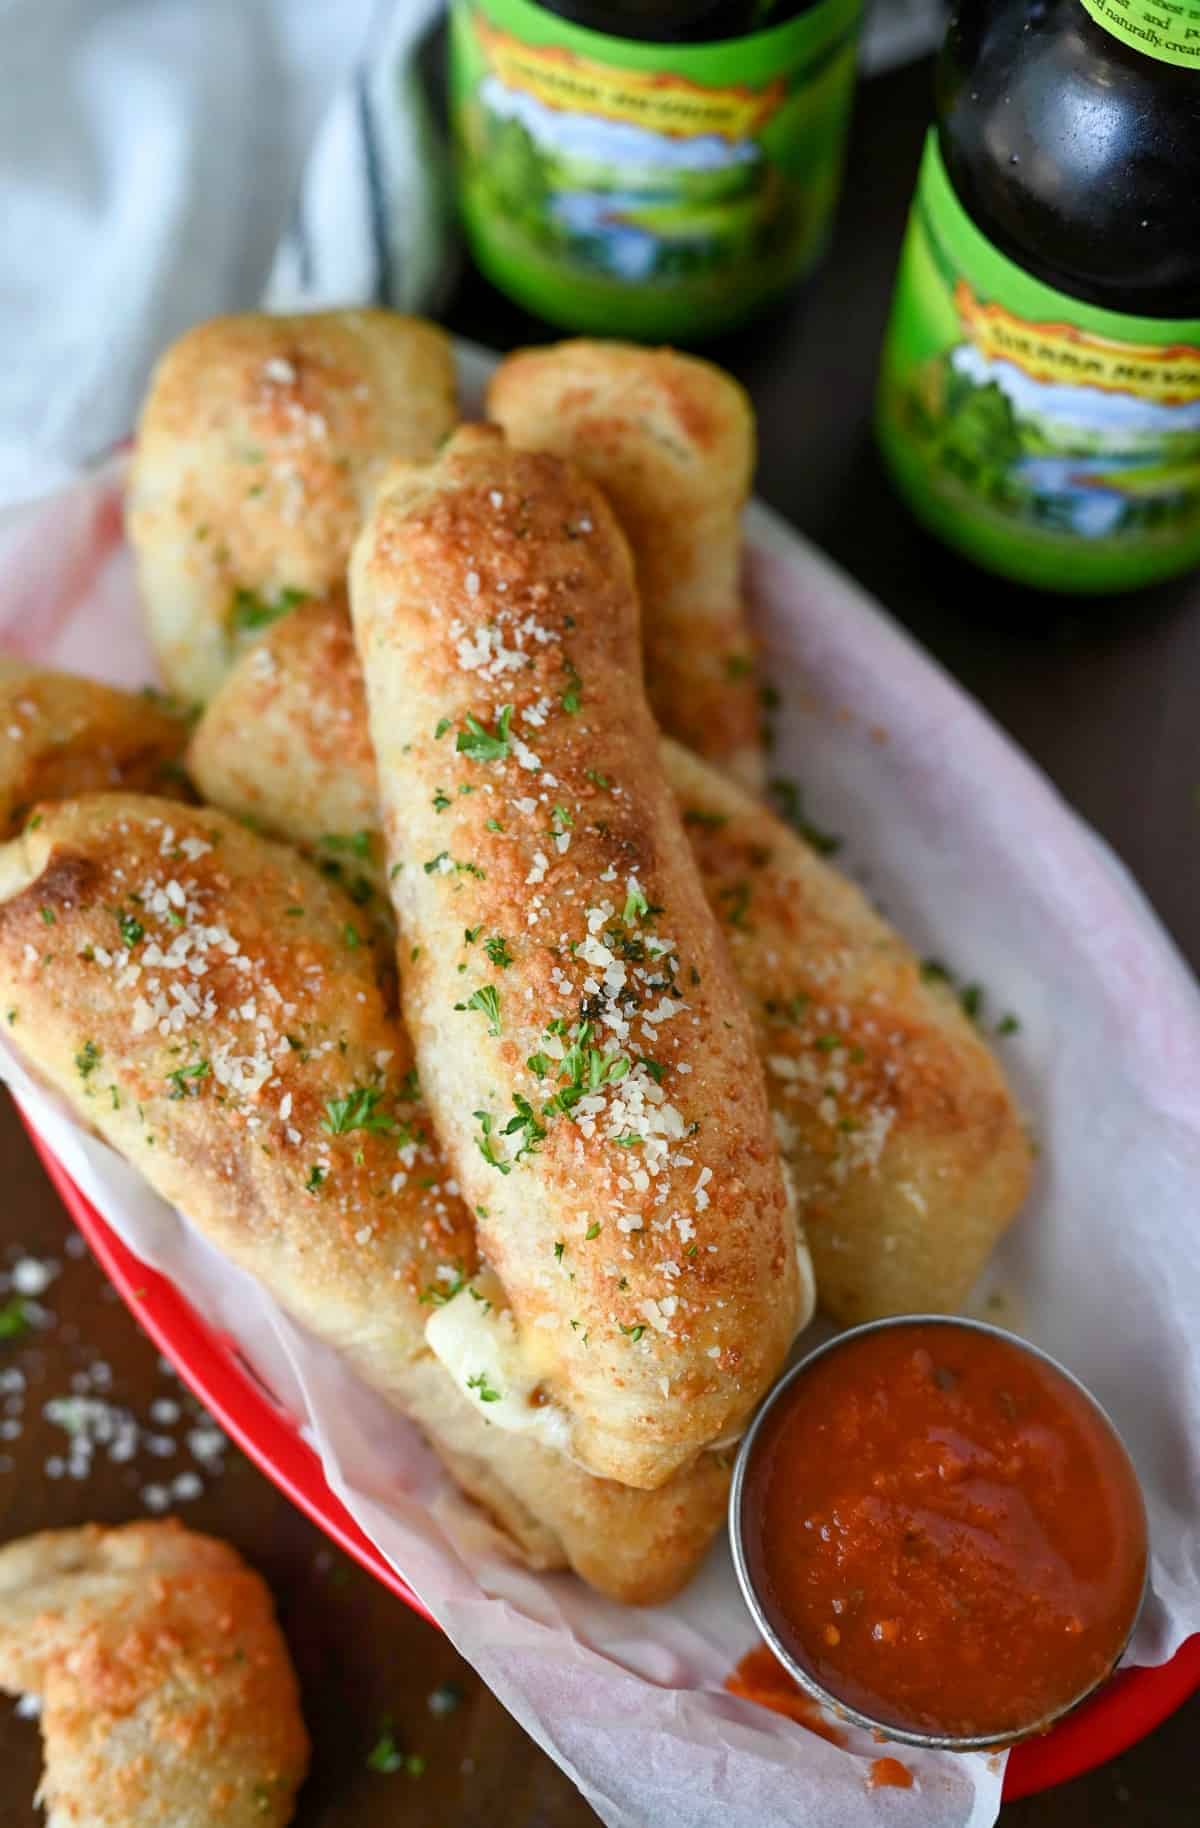 Pizza sticks in a basket with a side of pizza sauce.